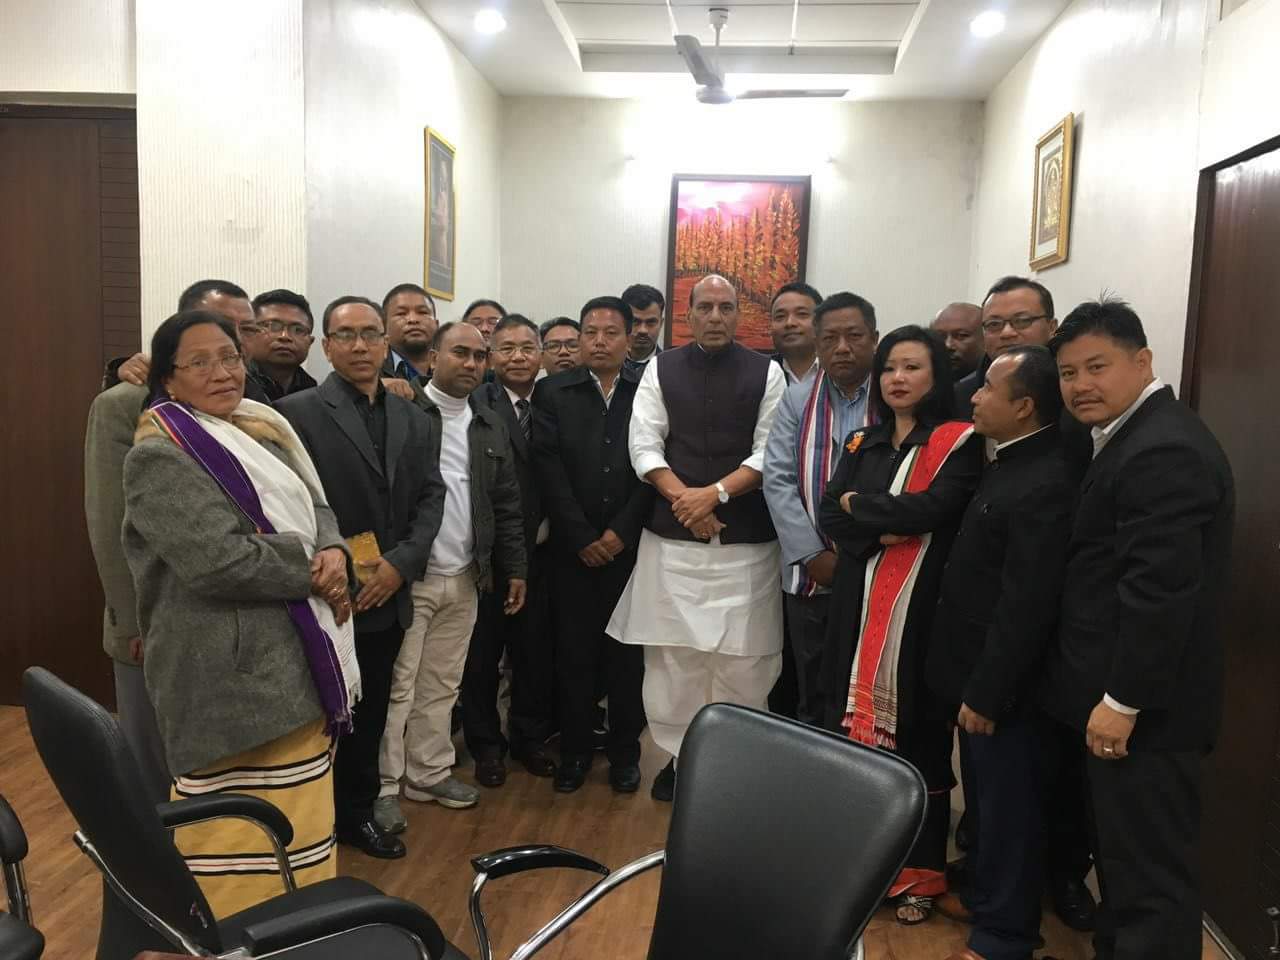 The civil society delegation with home minister Rajnath Singh. By special arrangement